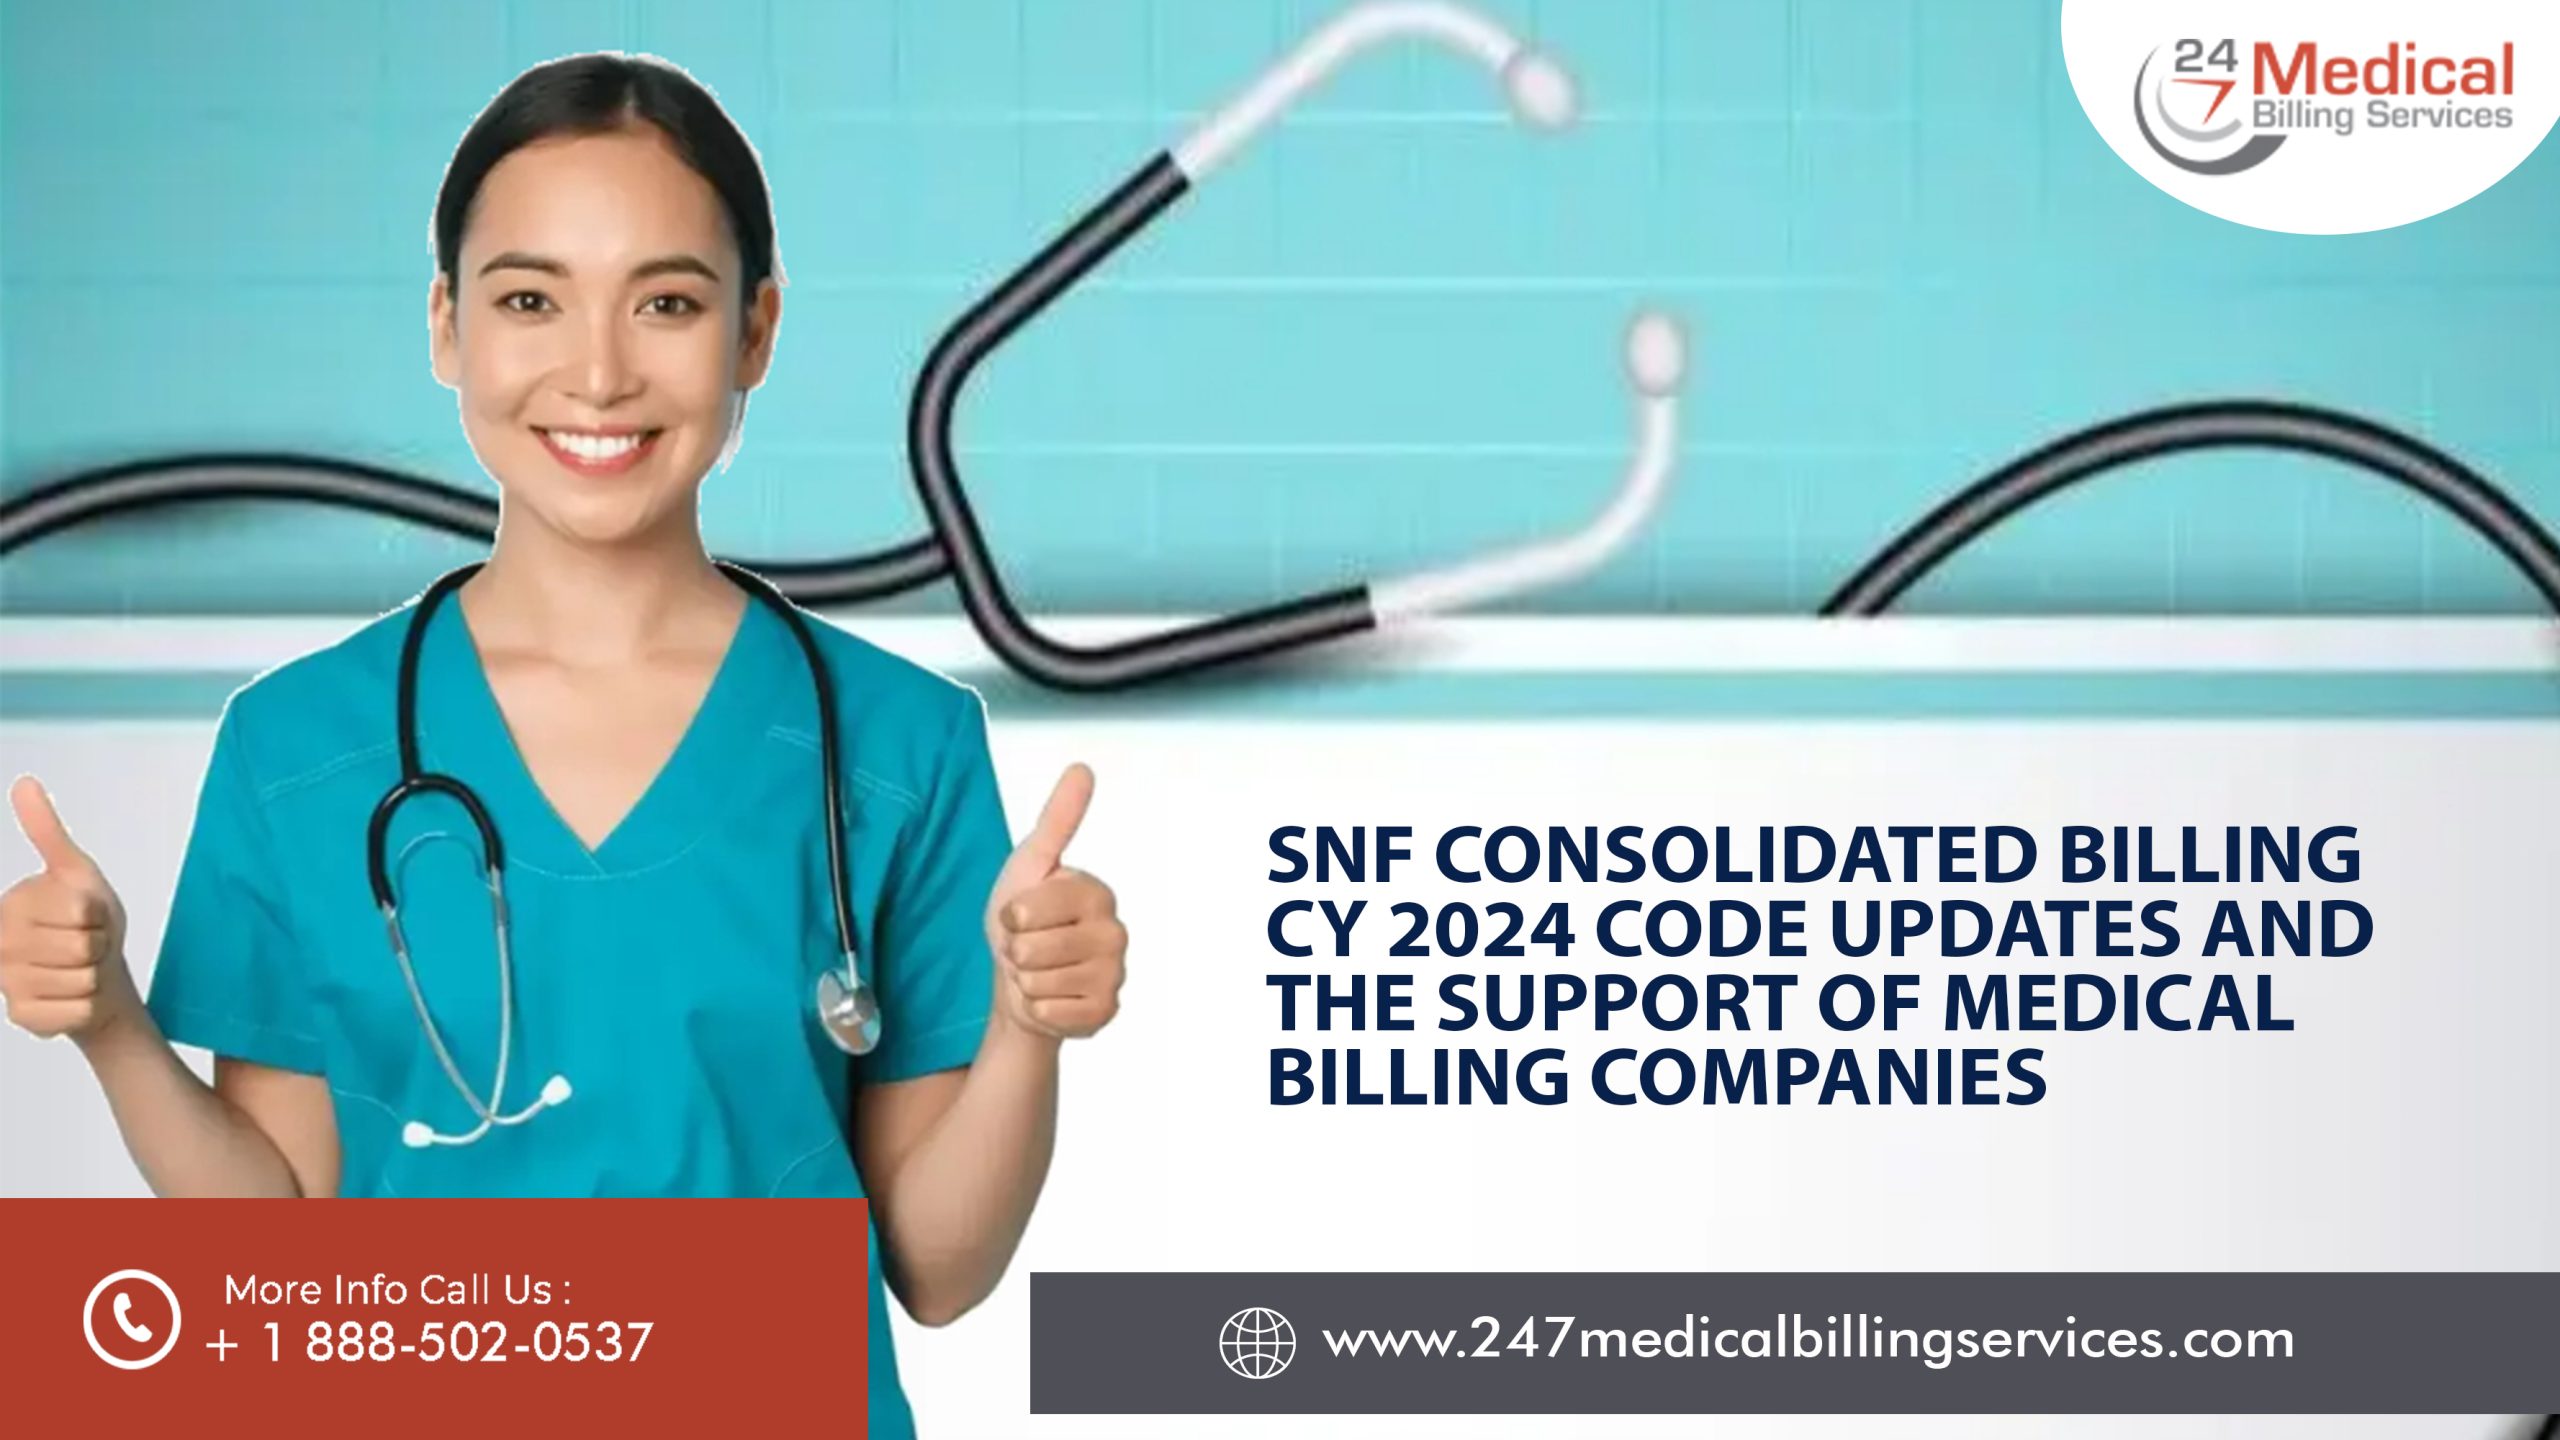 SNF Consolidated Billing CY 2024 Code Updates and the Support of